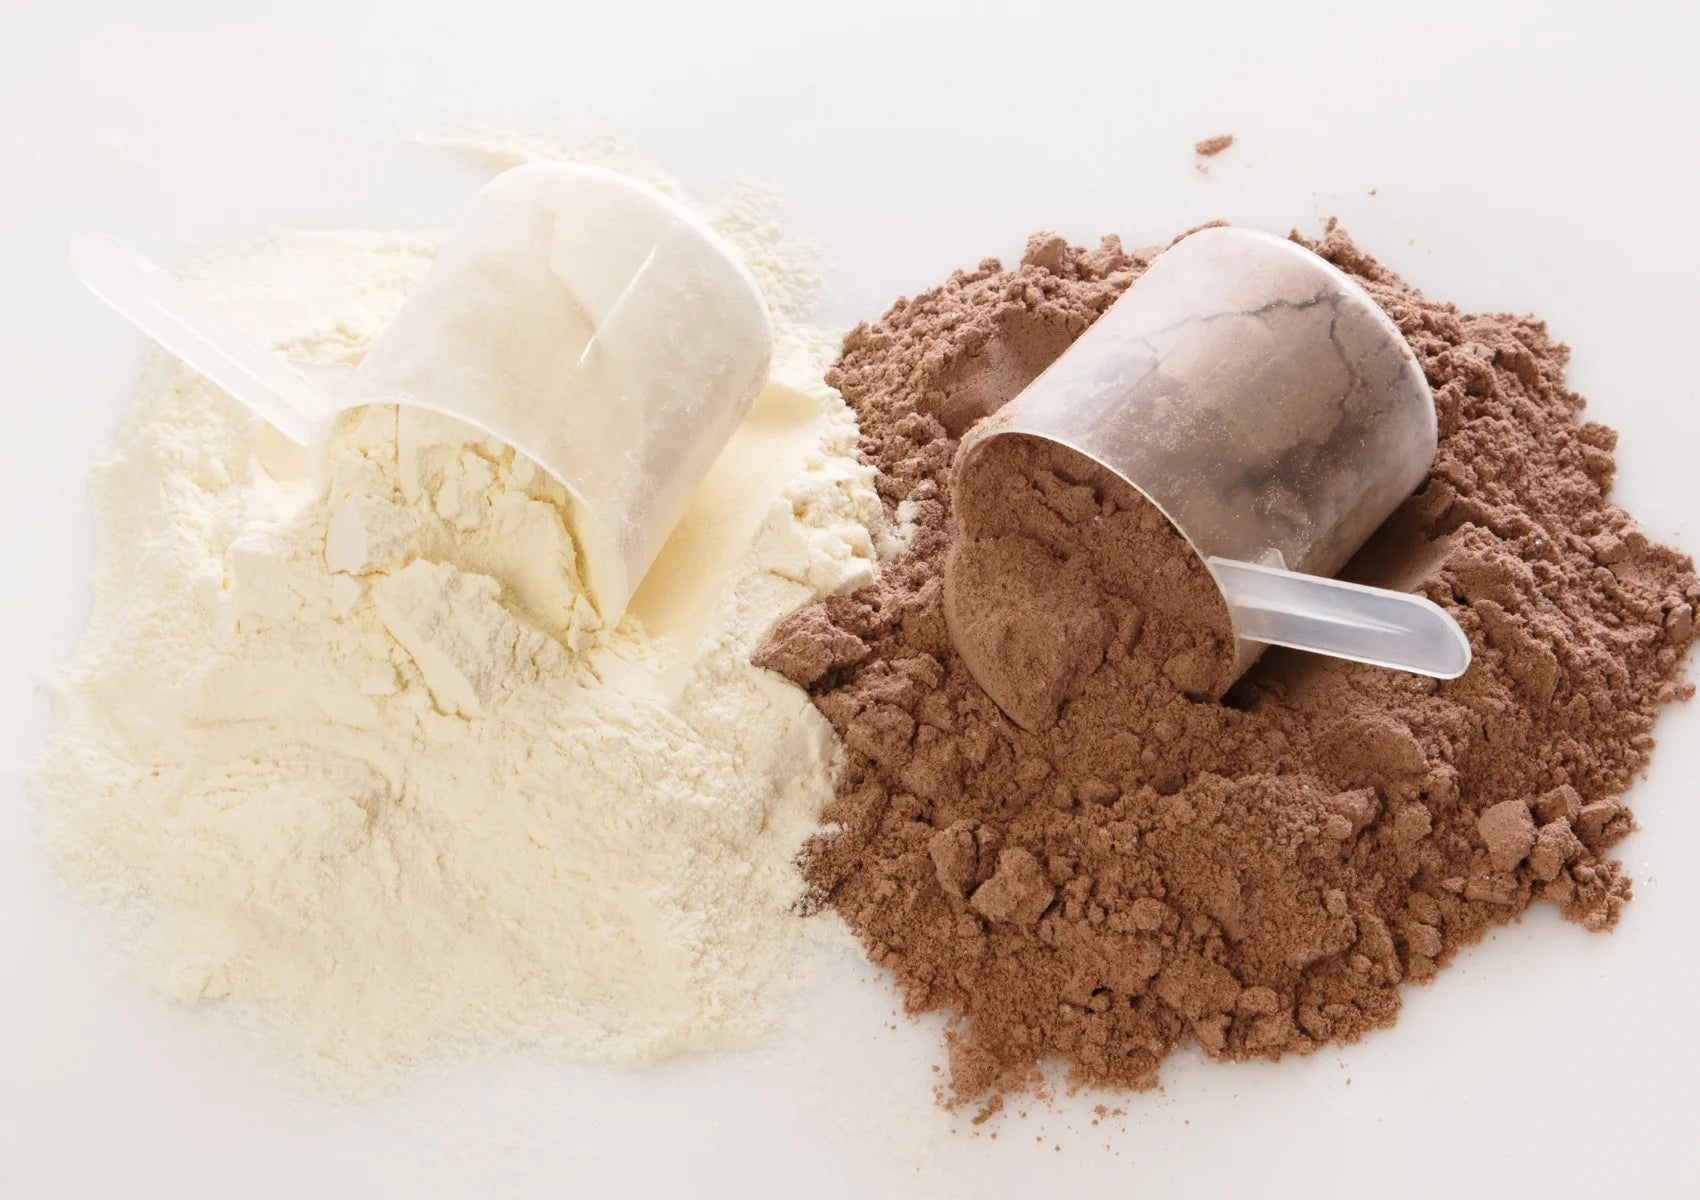 scoops of vanilla and chocolate whey powder, protein powder